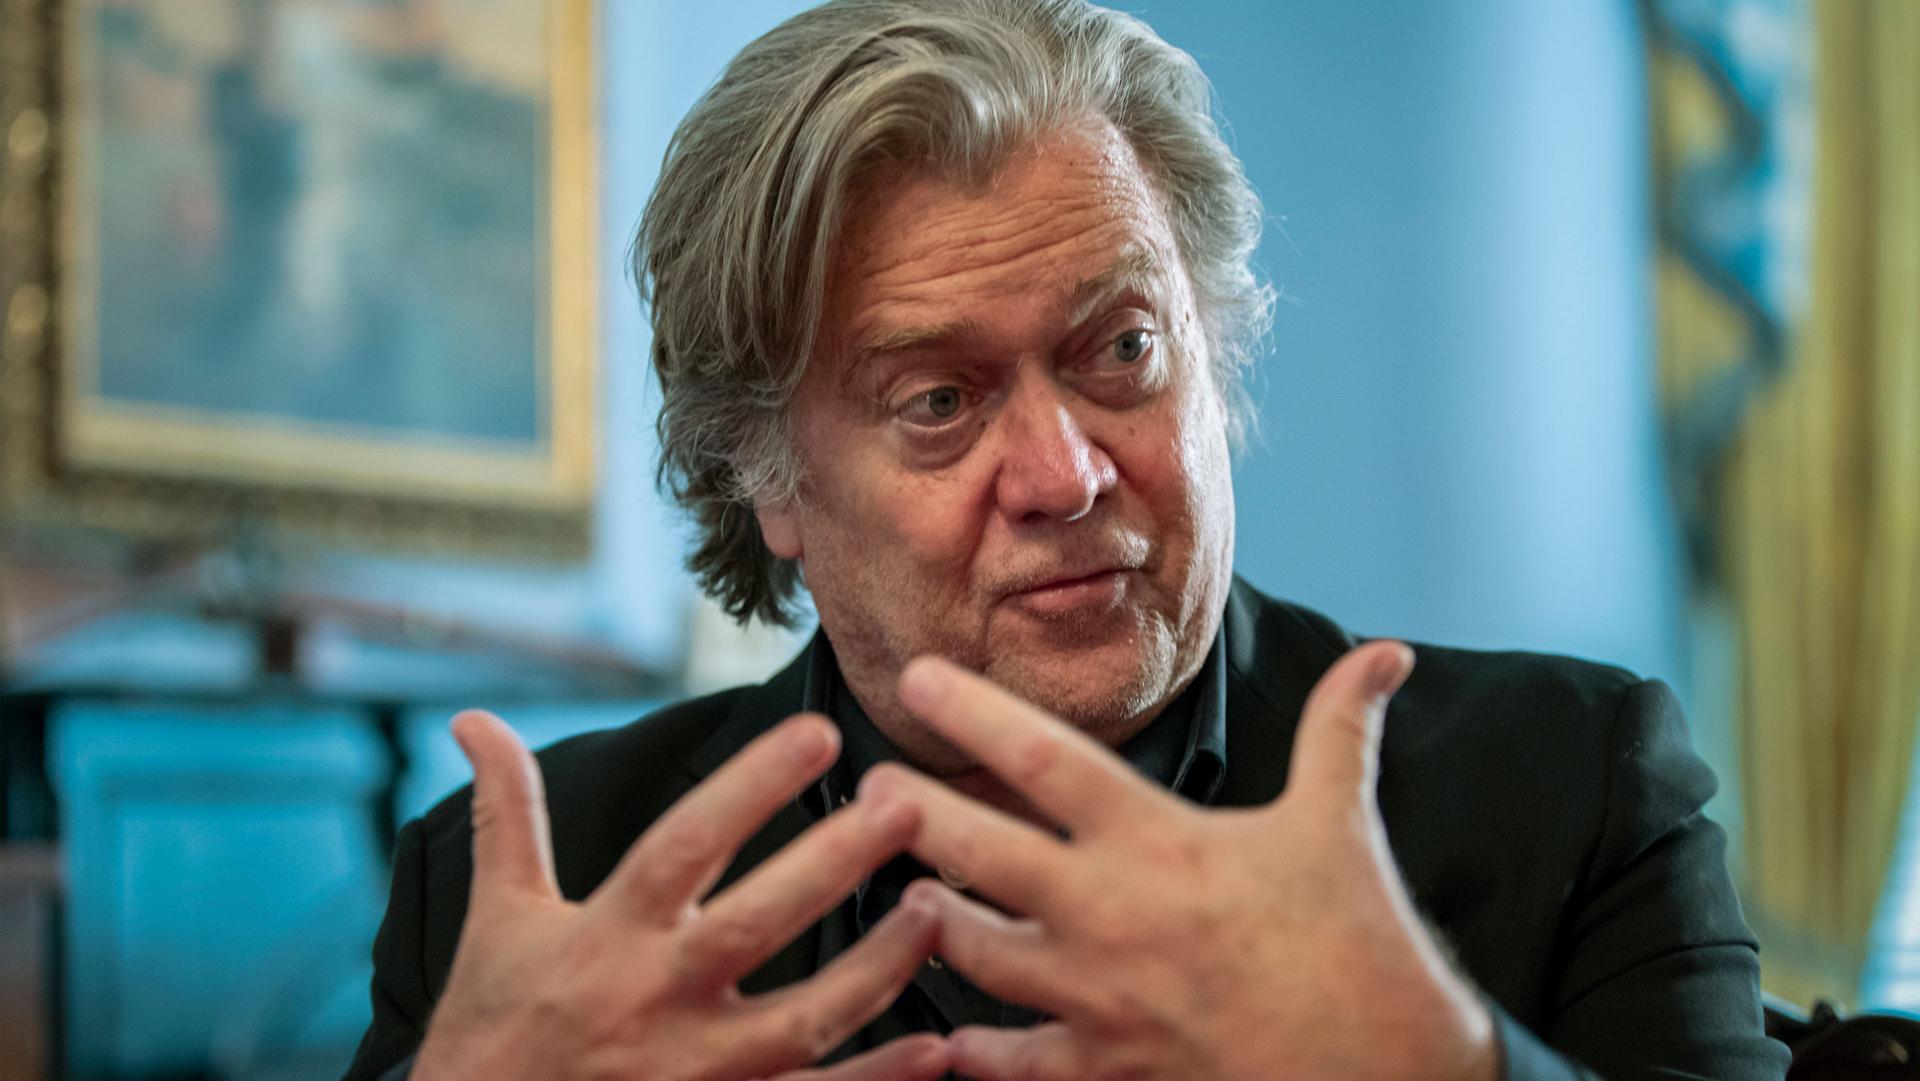 A close-up photograph of Steve Bannon who has his hands out in front in a gesture whiile speaking.